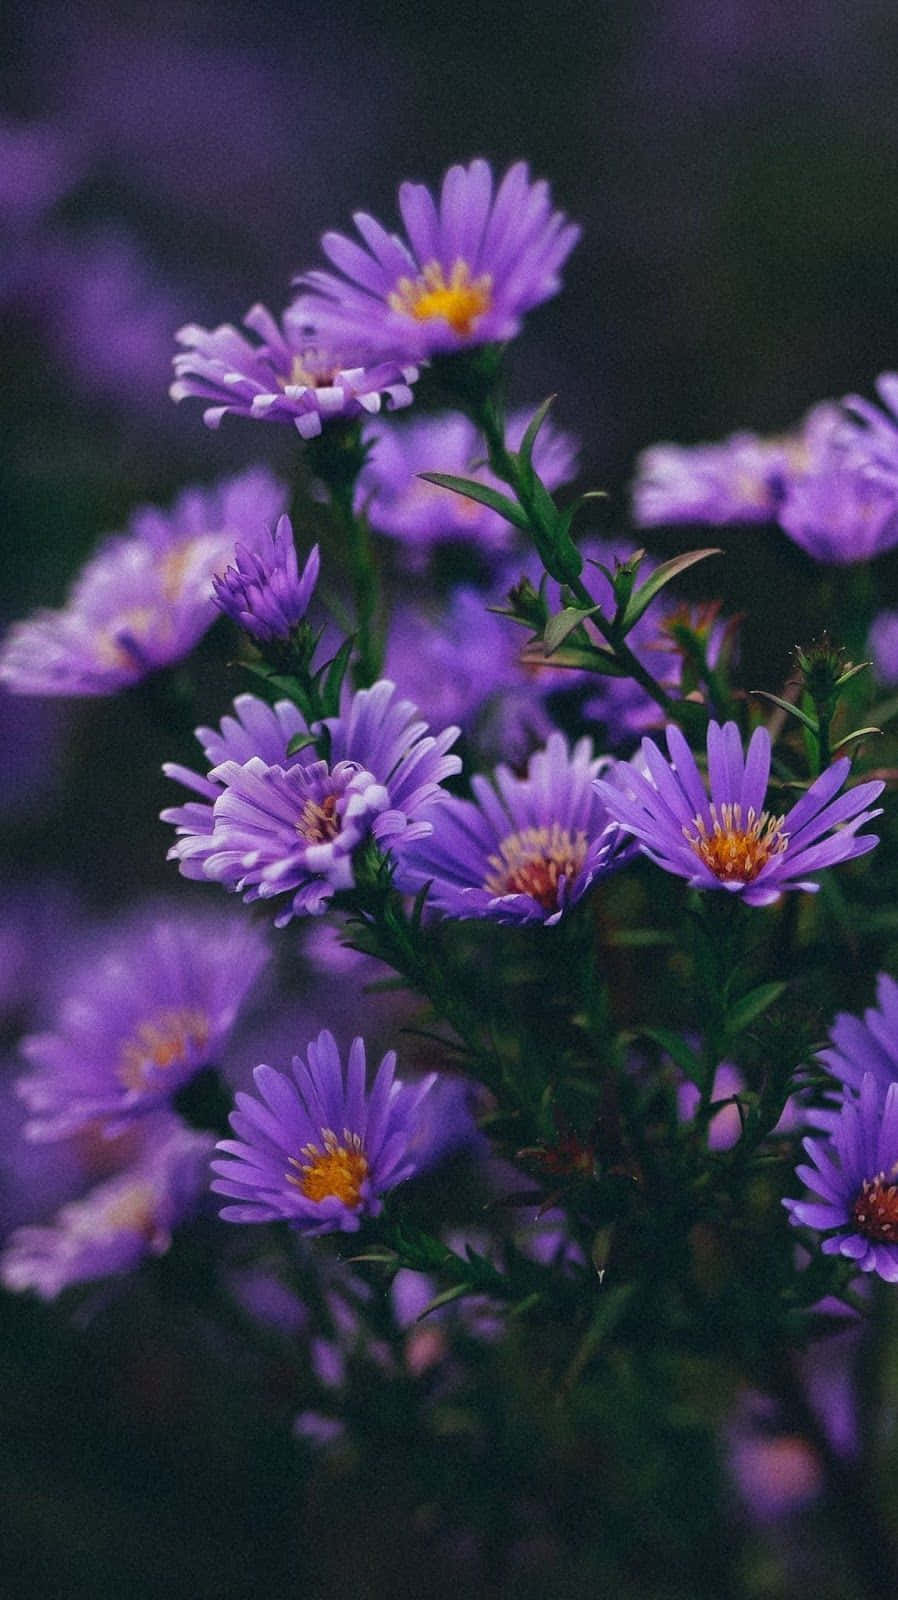 Aesthetic Purple Cosmos Flowers Close Up Shot Background